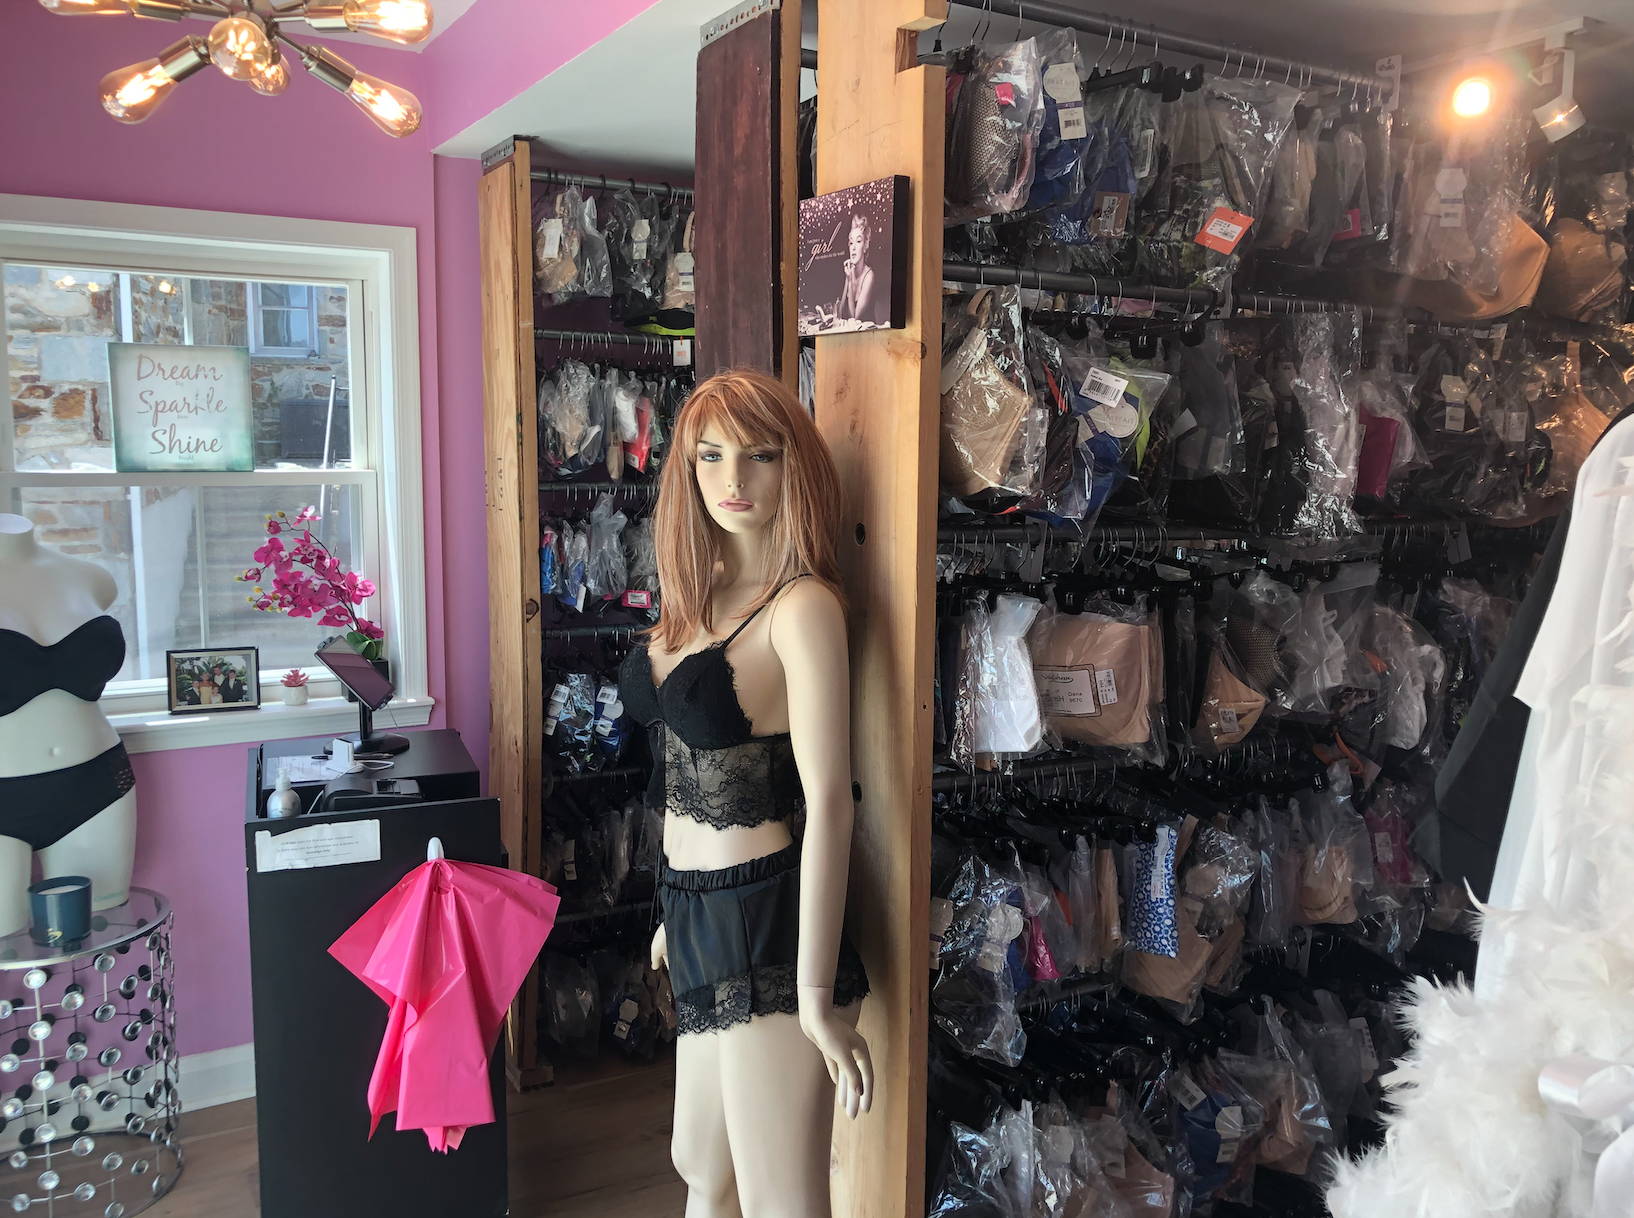 Baltimore's Largest and Best Bra Selection